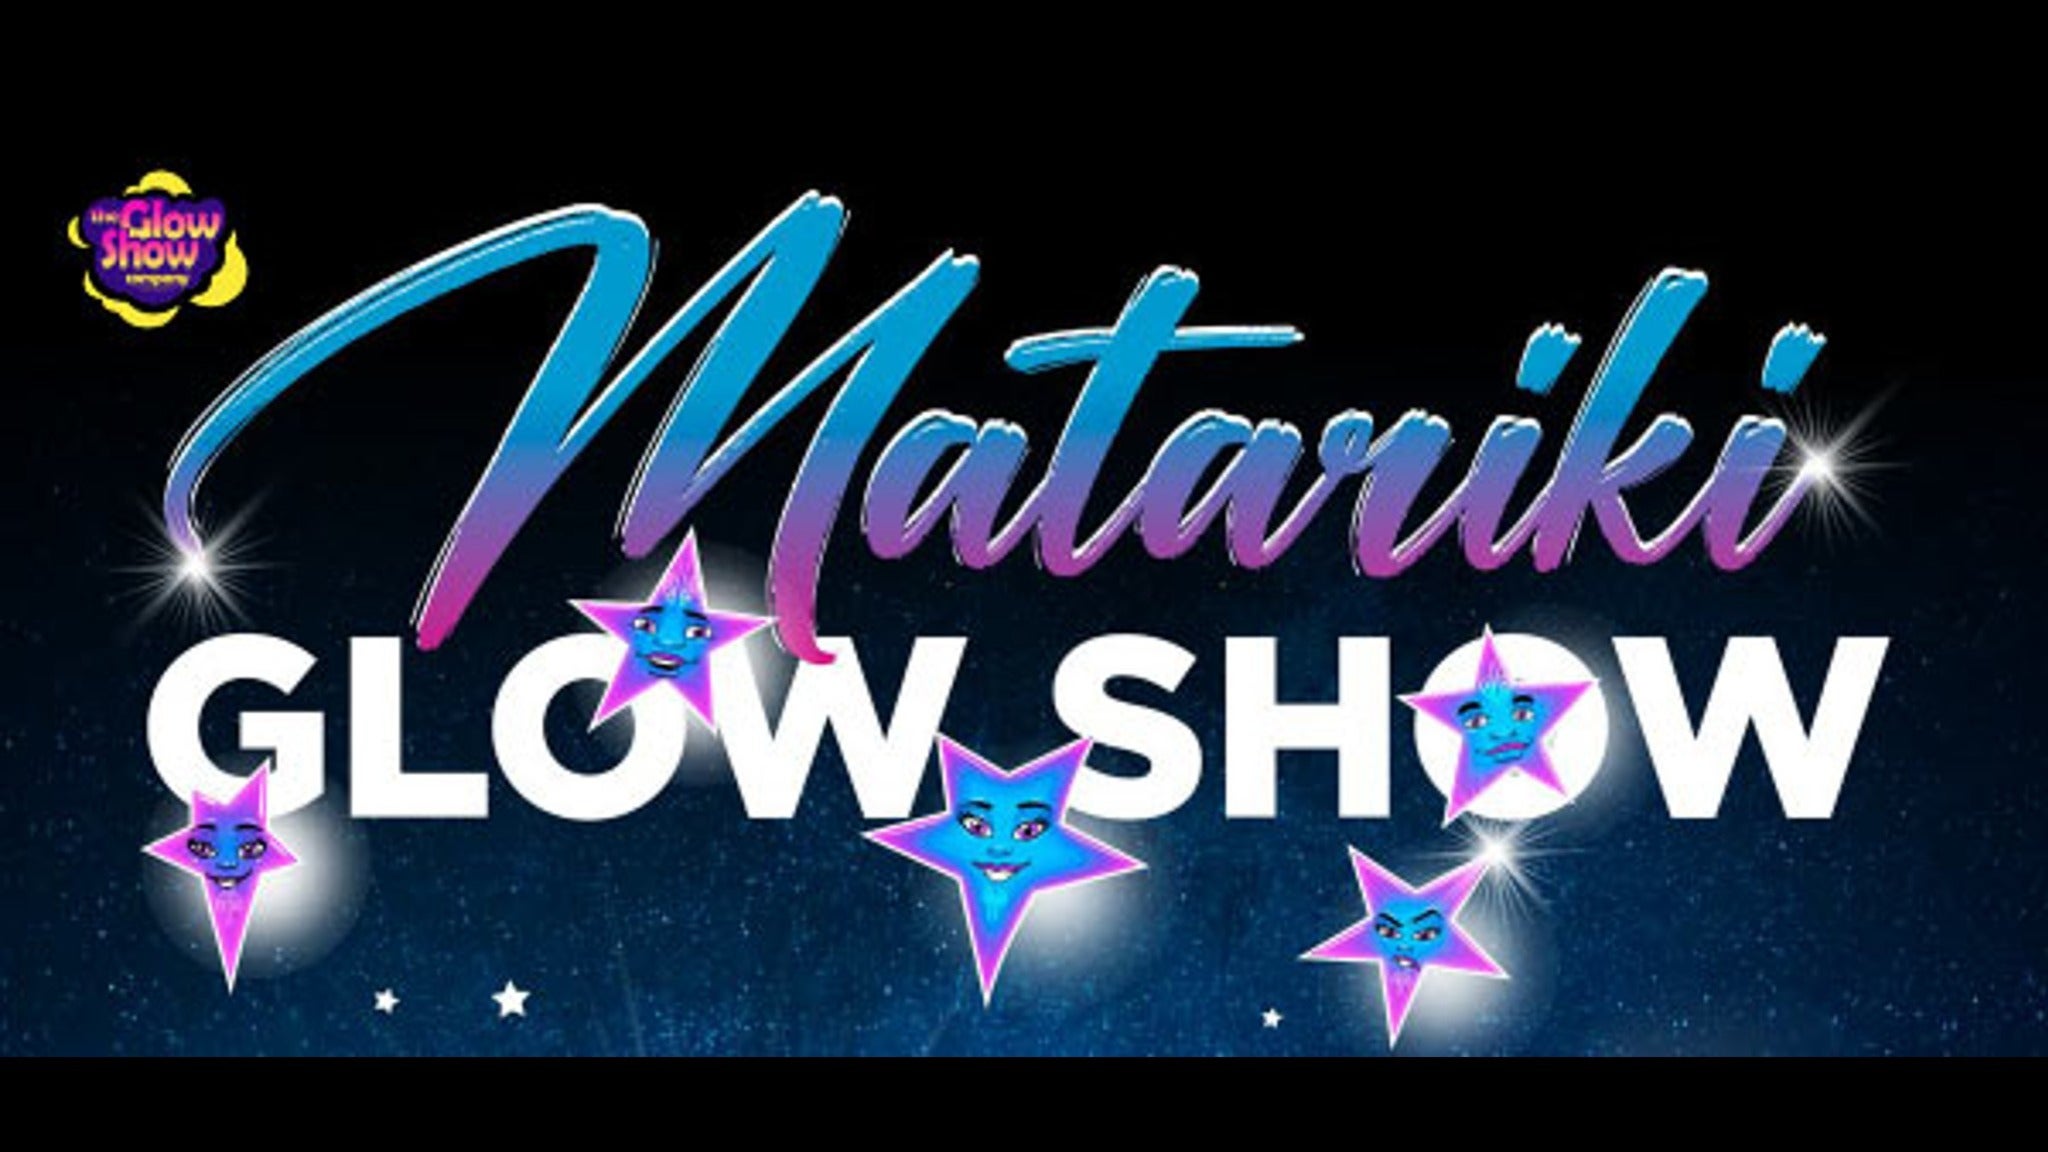 Image used with permission from Ticketmaster | Matariki Glow Show tickets